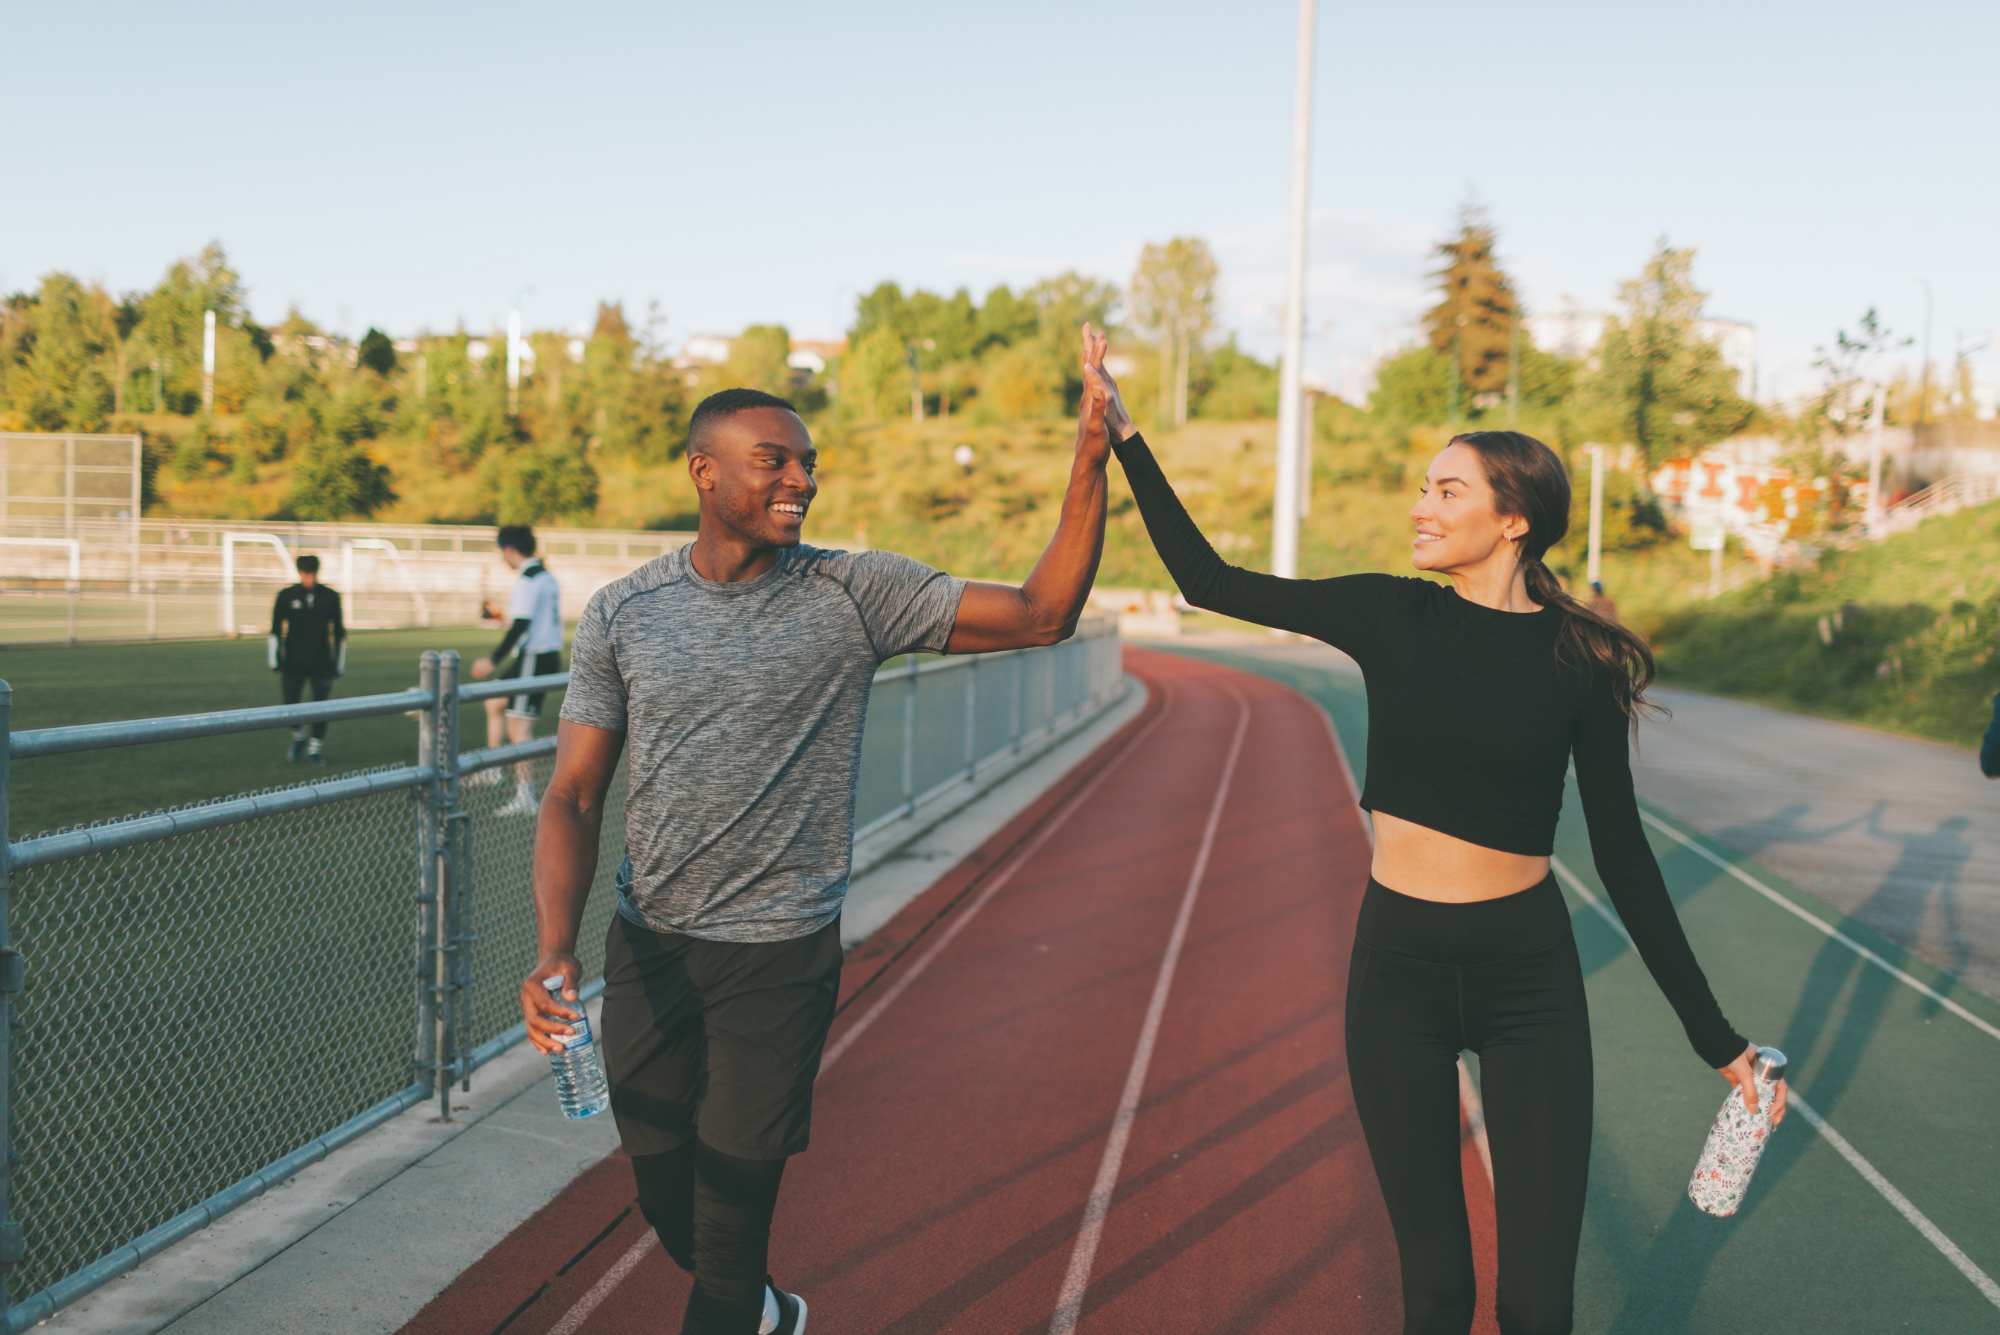 Two friends exchange smiles and a high-five, celebrating their completed workout, showing their commitment to the pillars of health.